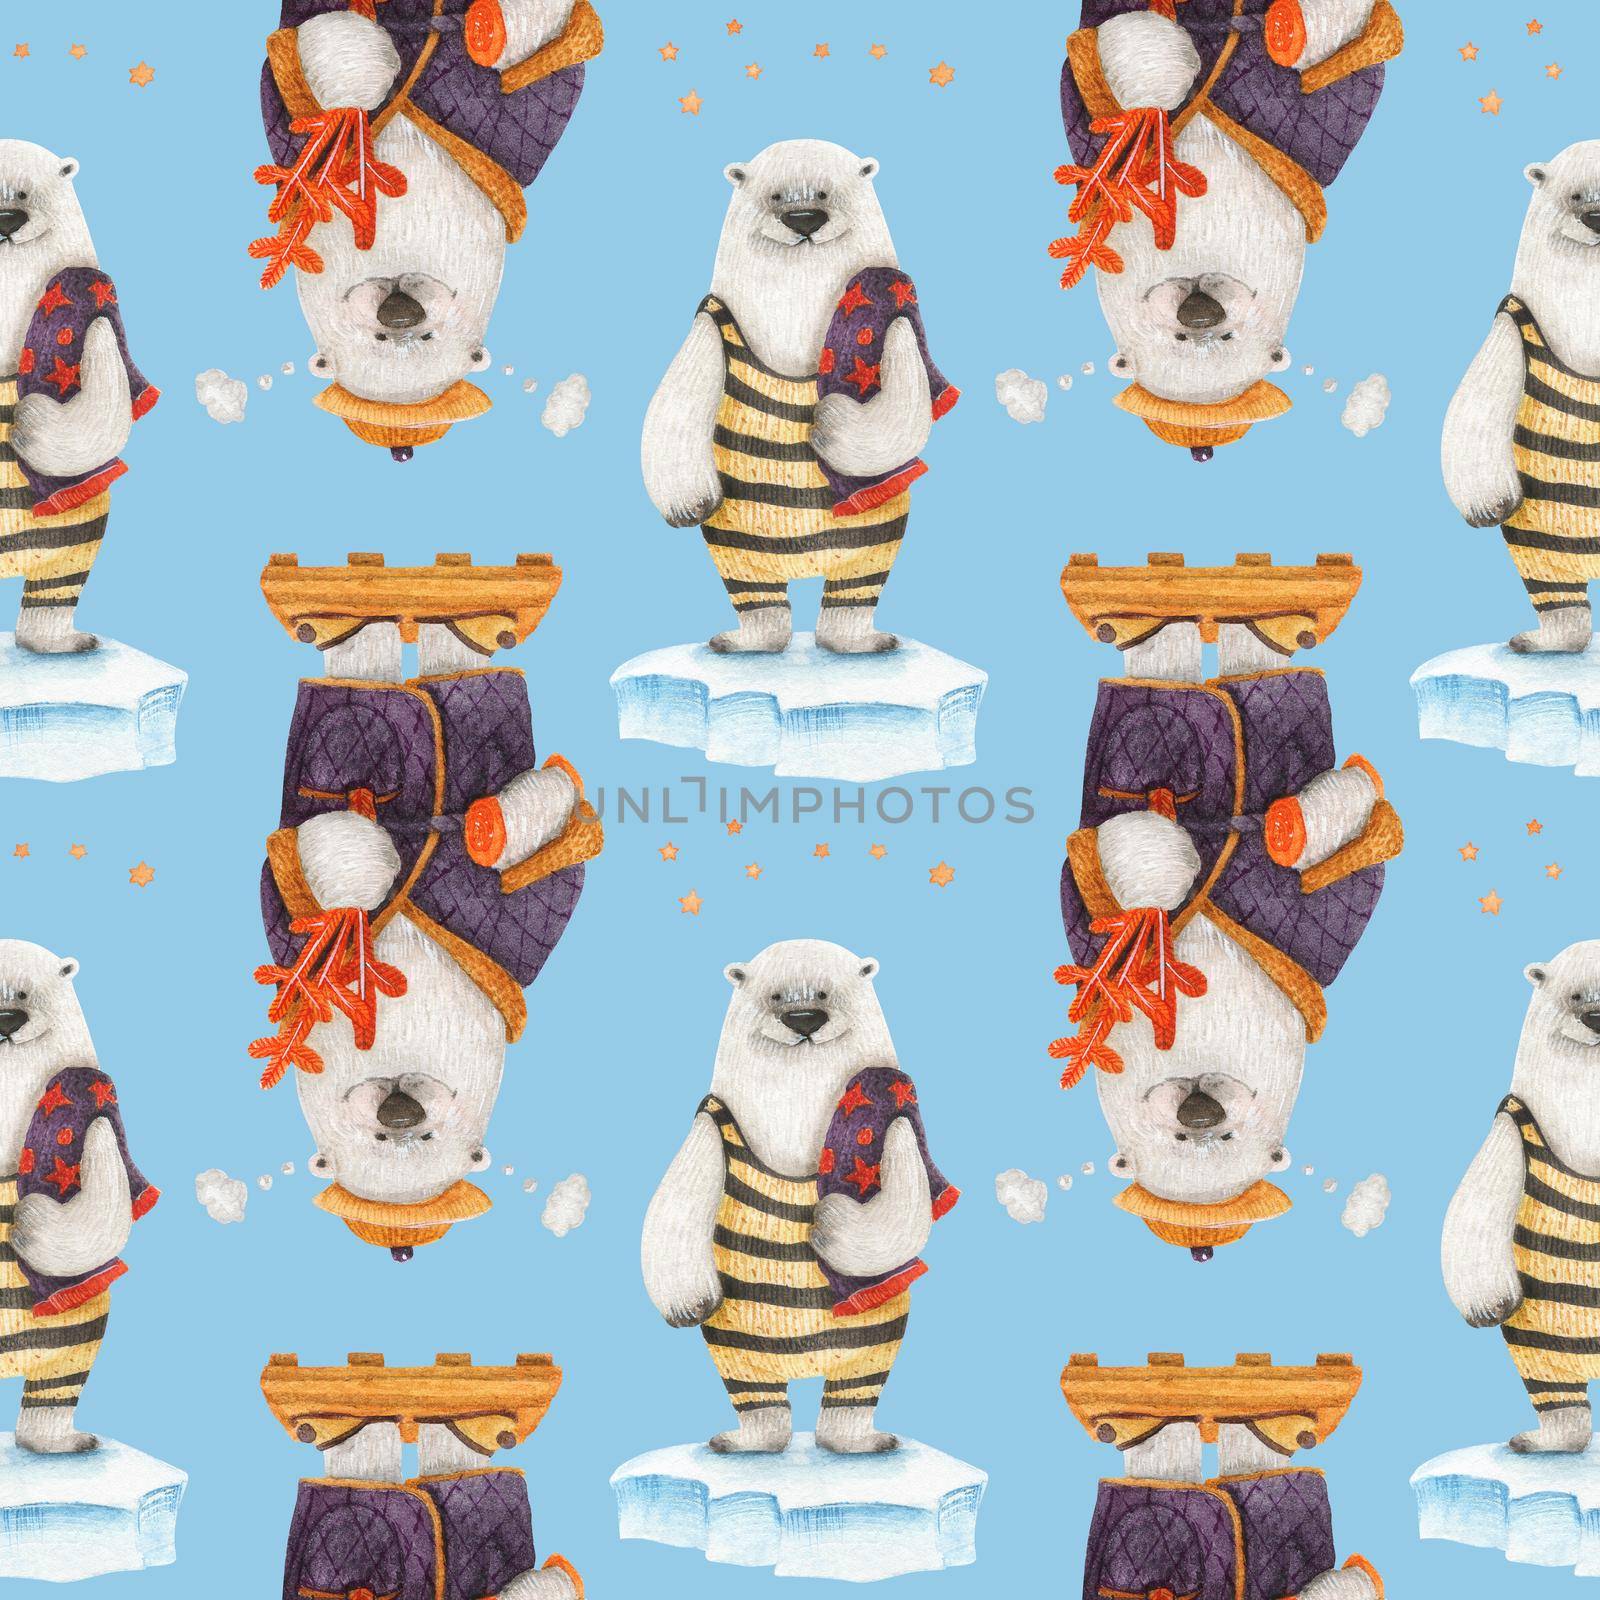 Polar bear healthy lifestyle. Bears in sauna. Watercolor seamless patterns for textile, wrapping paper and any tiled design. Bluebackground, clipping path uncluded